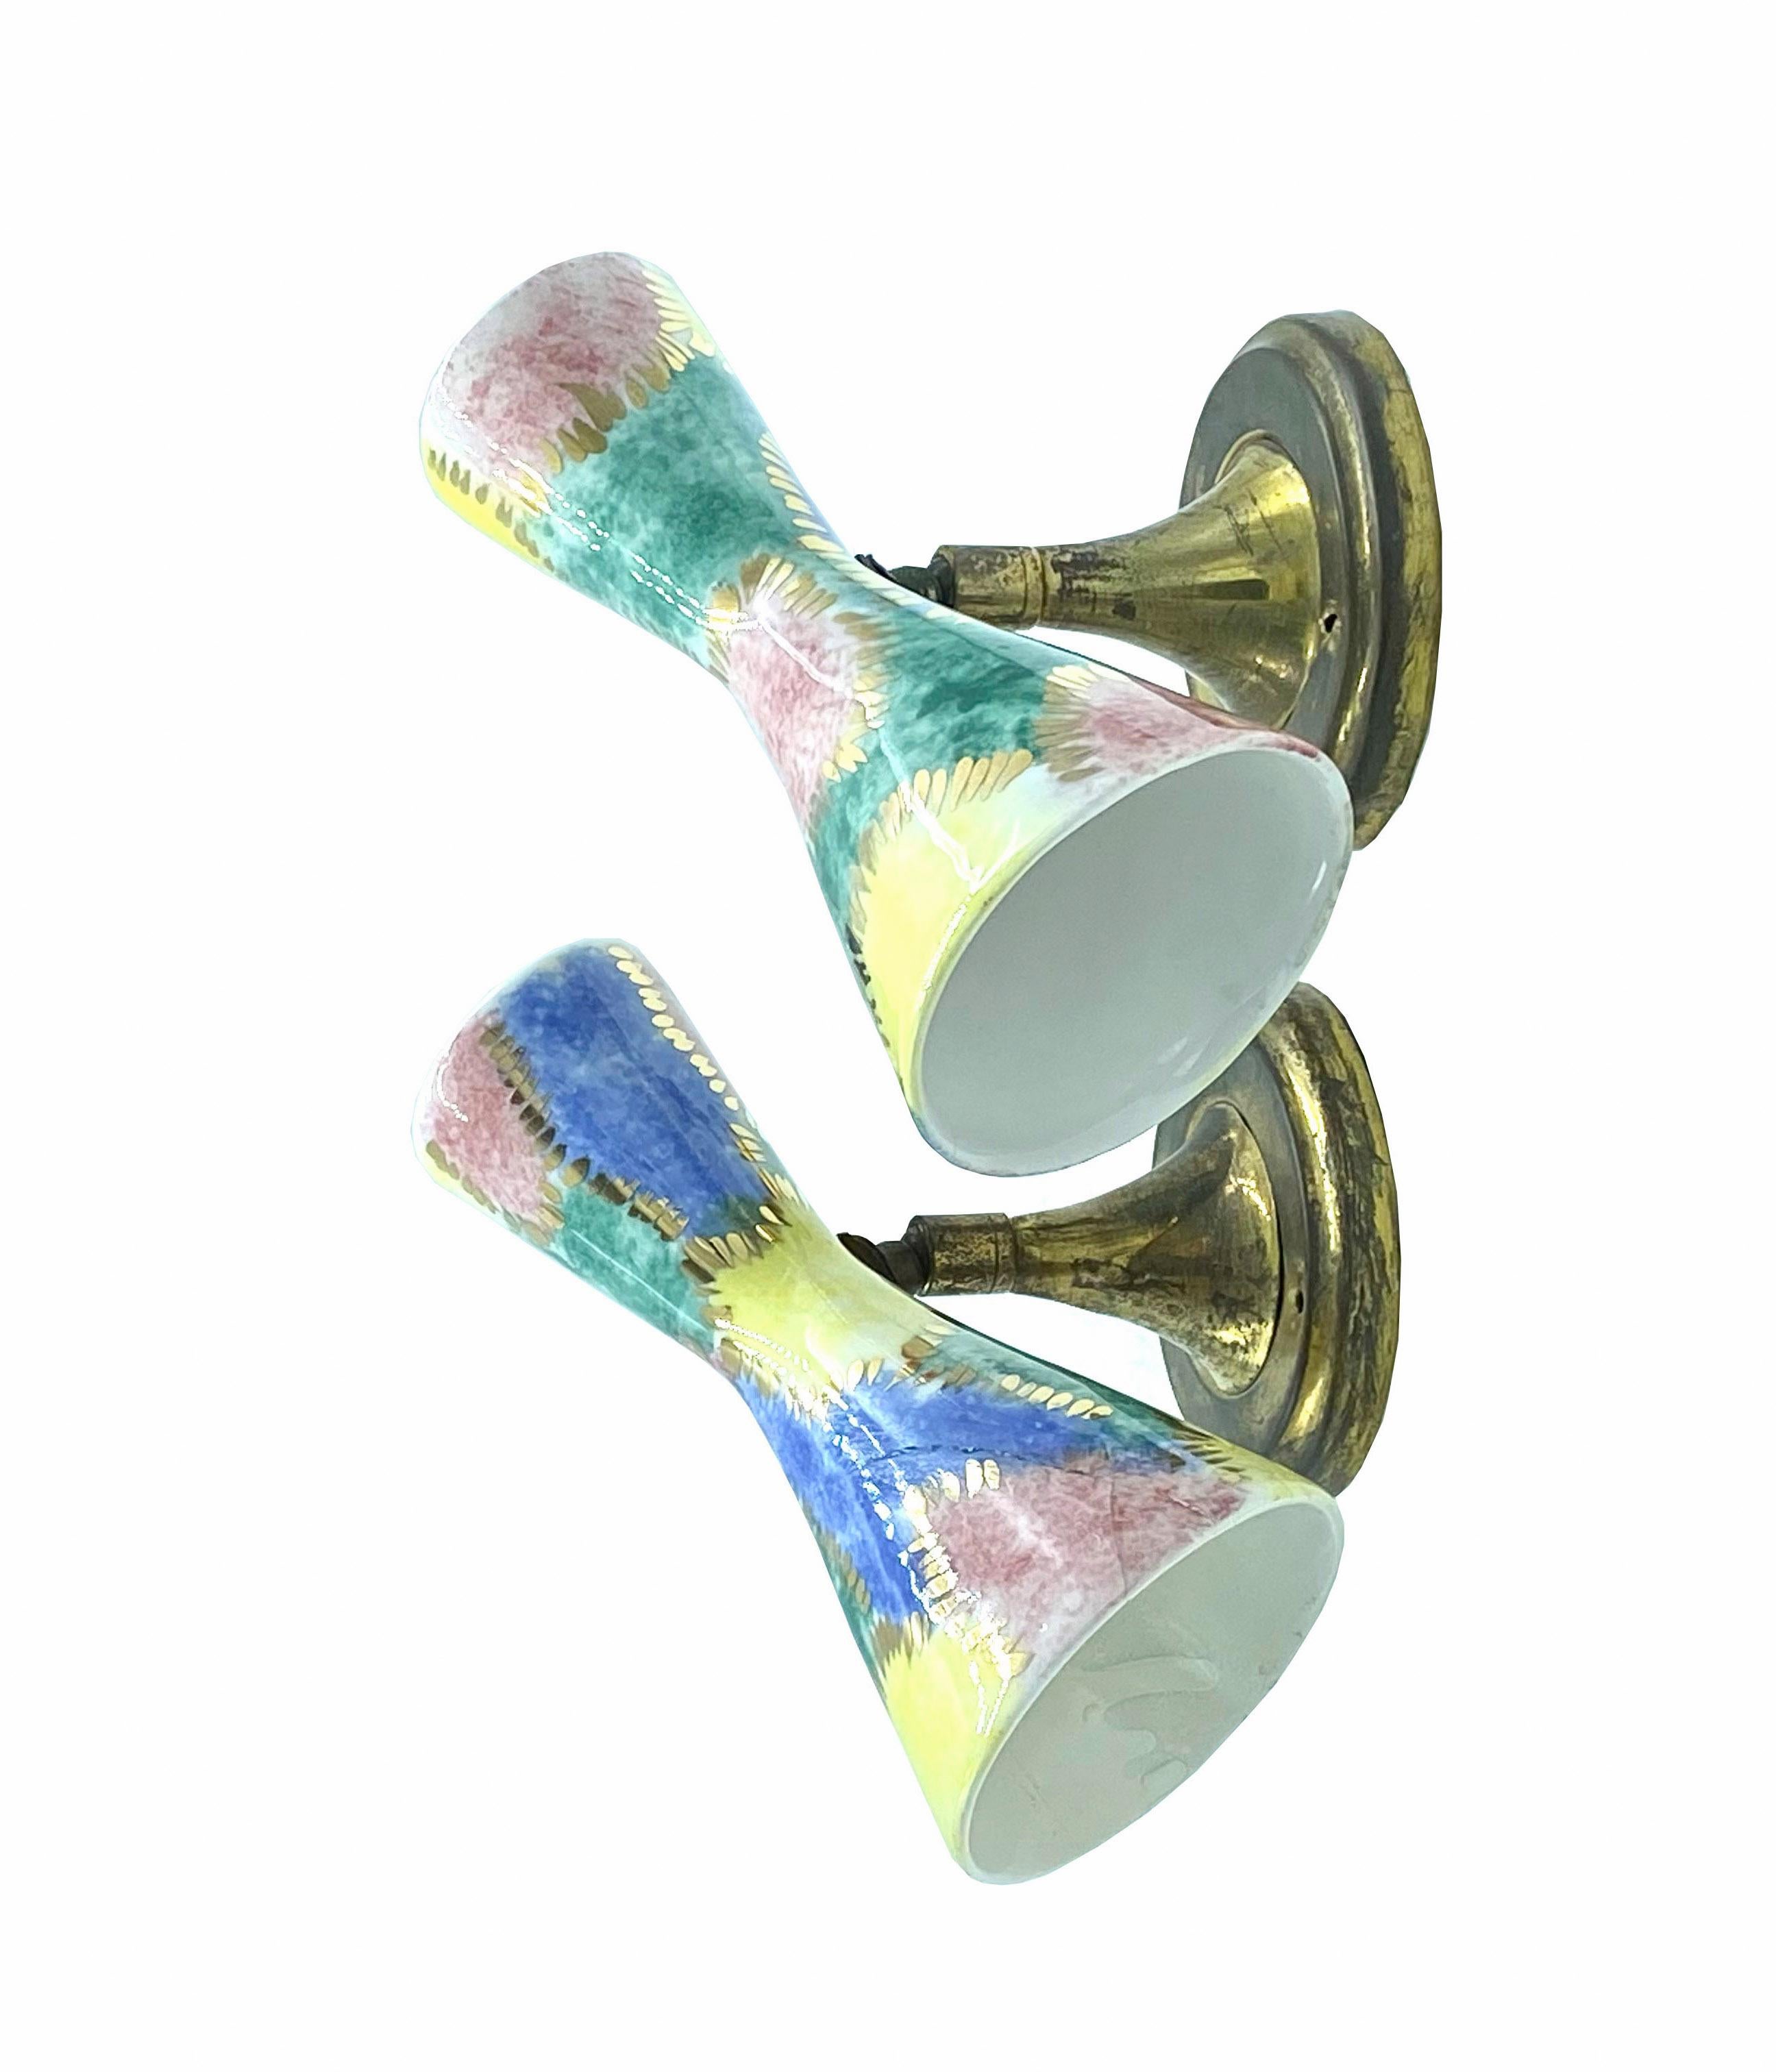 Mid-Century Modern Pair of Brass and Colored Ceramic Wall Sconces, Italy 1950s